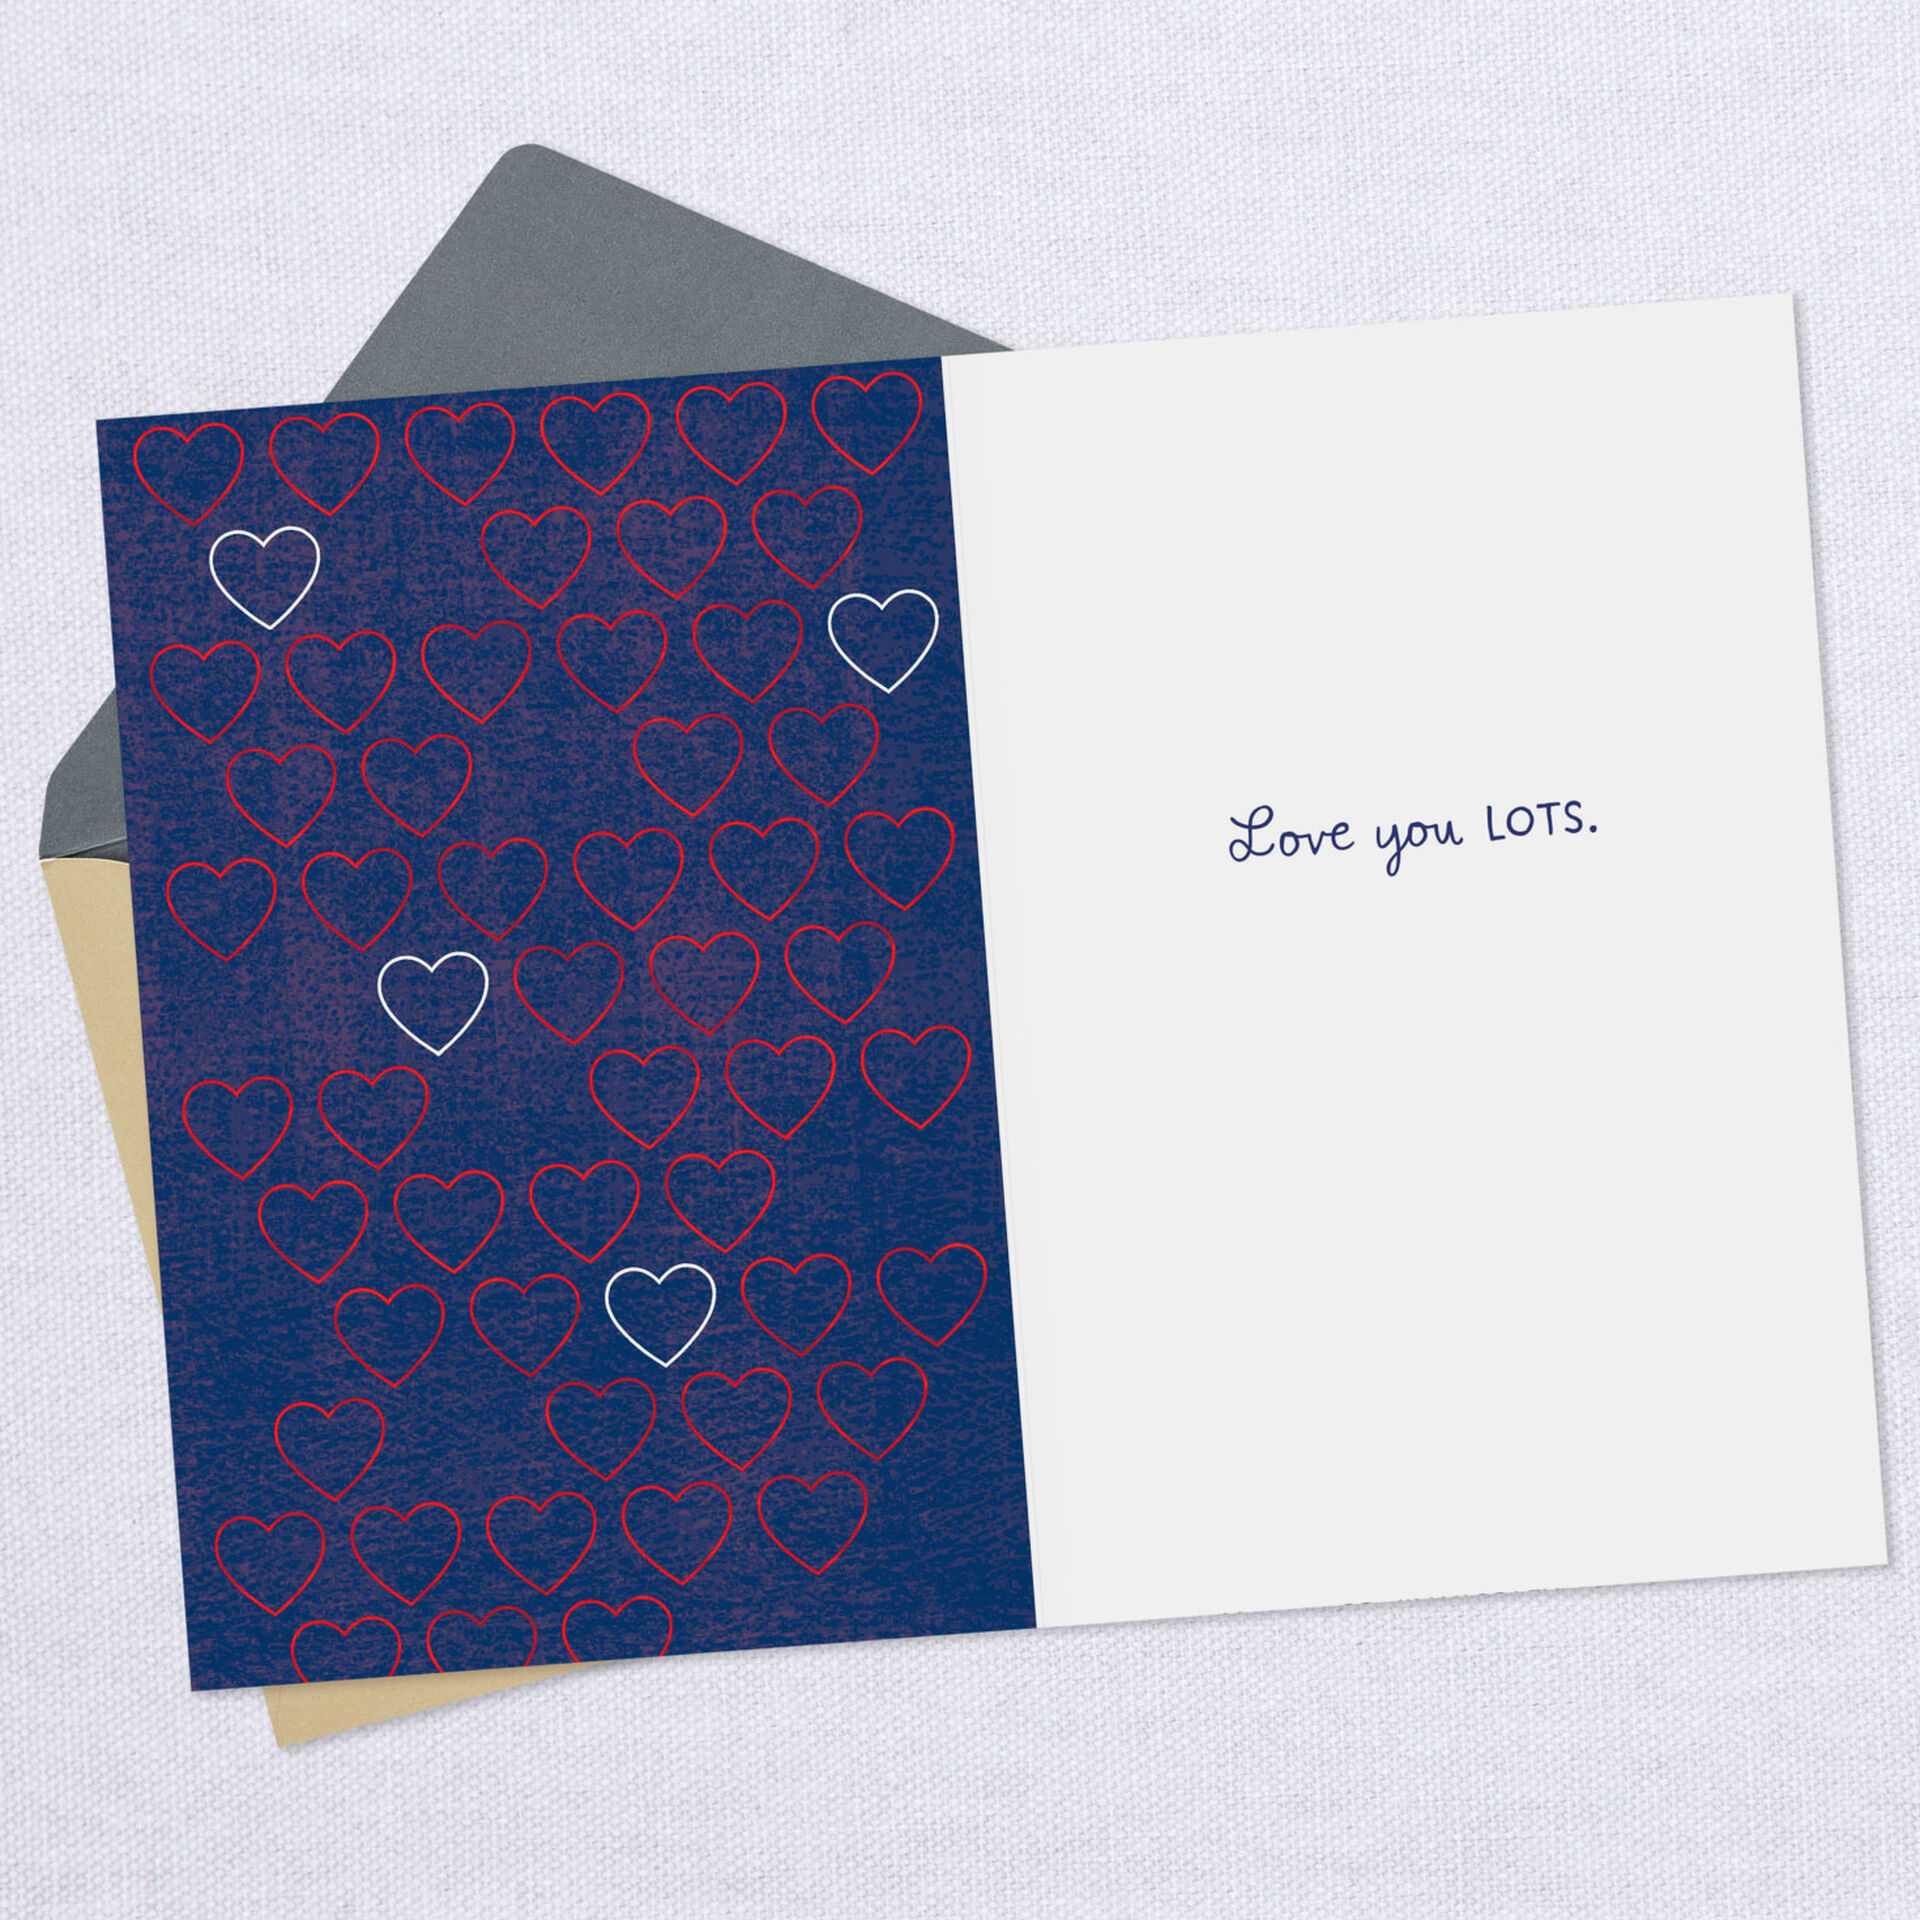 Love-You-Lots-Miss-You-Card_299M1685_03